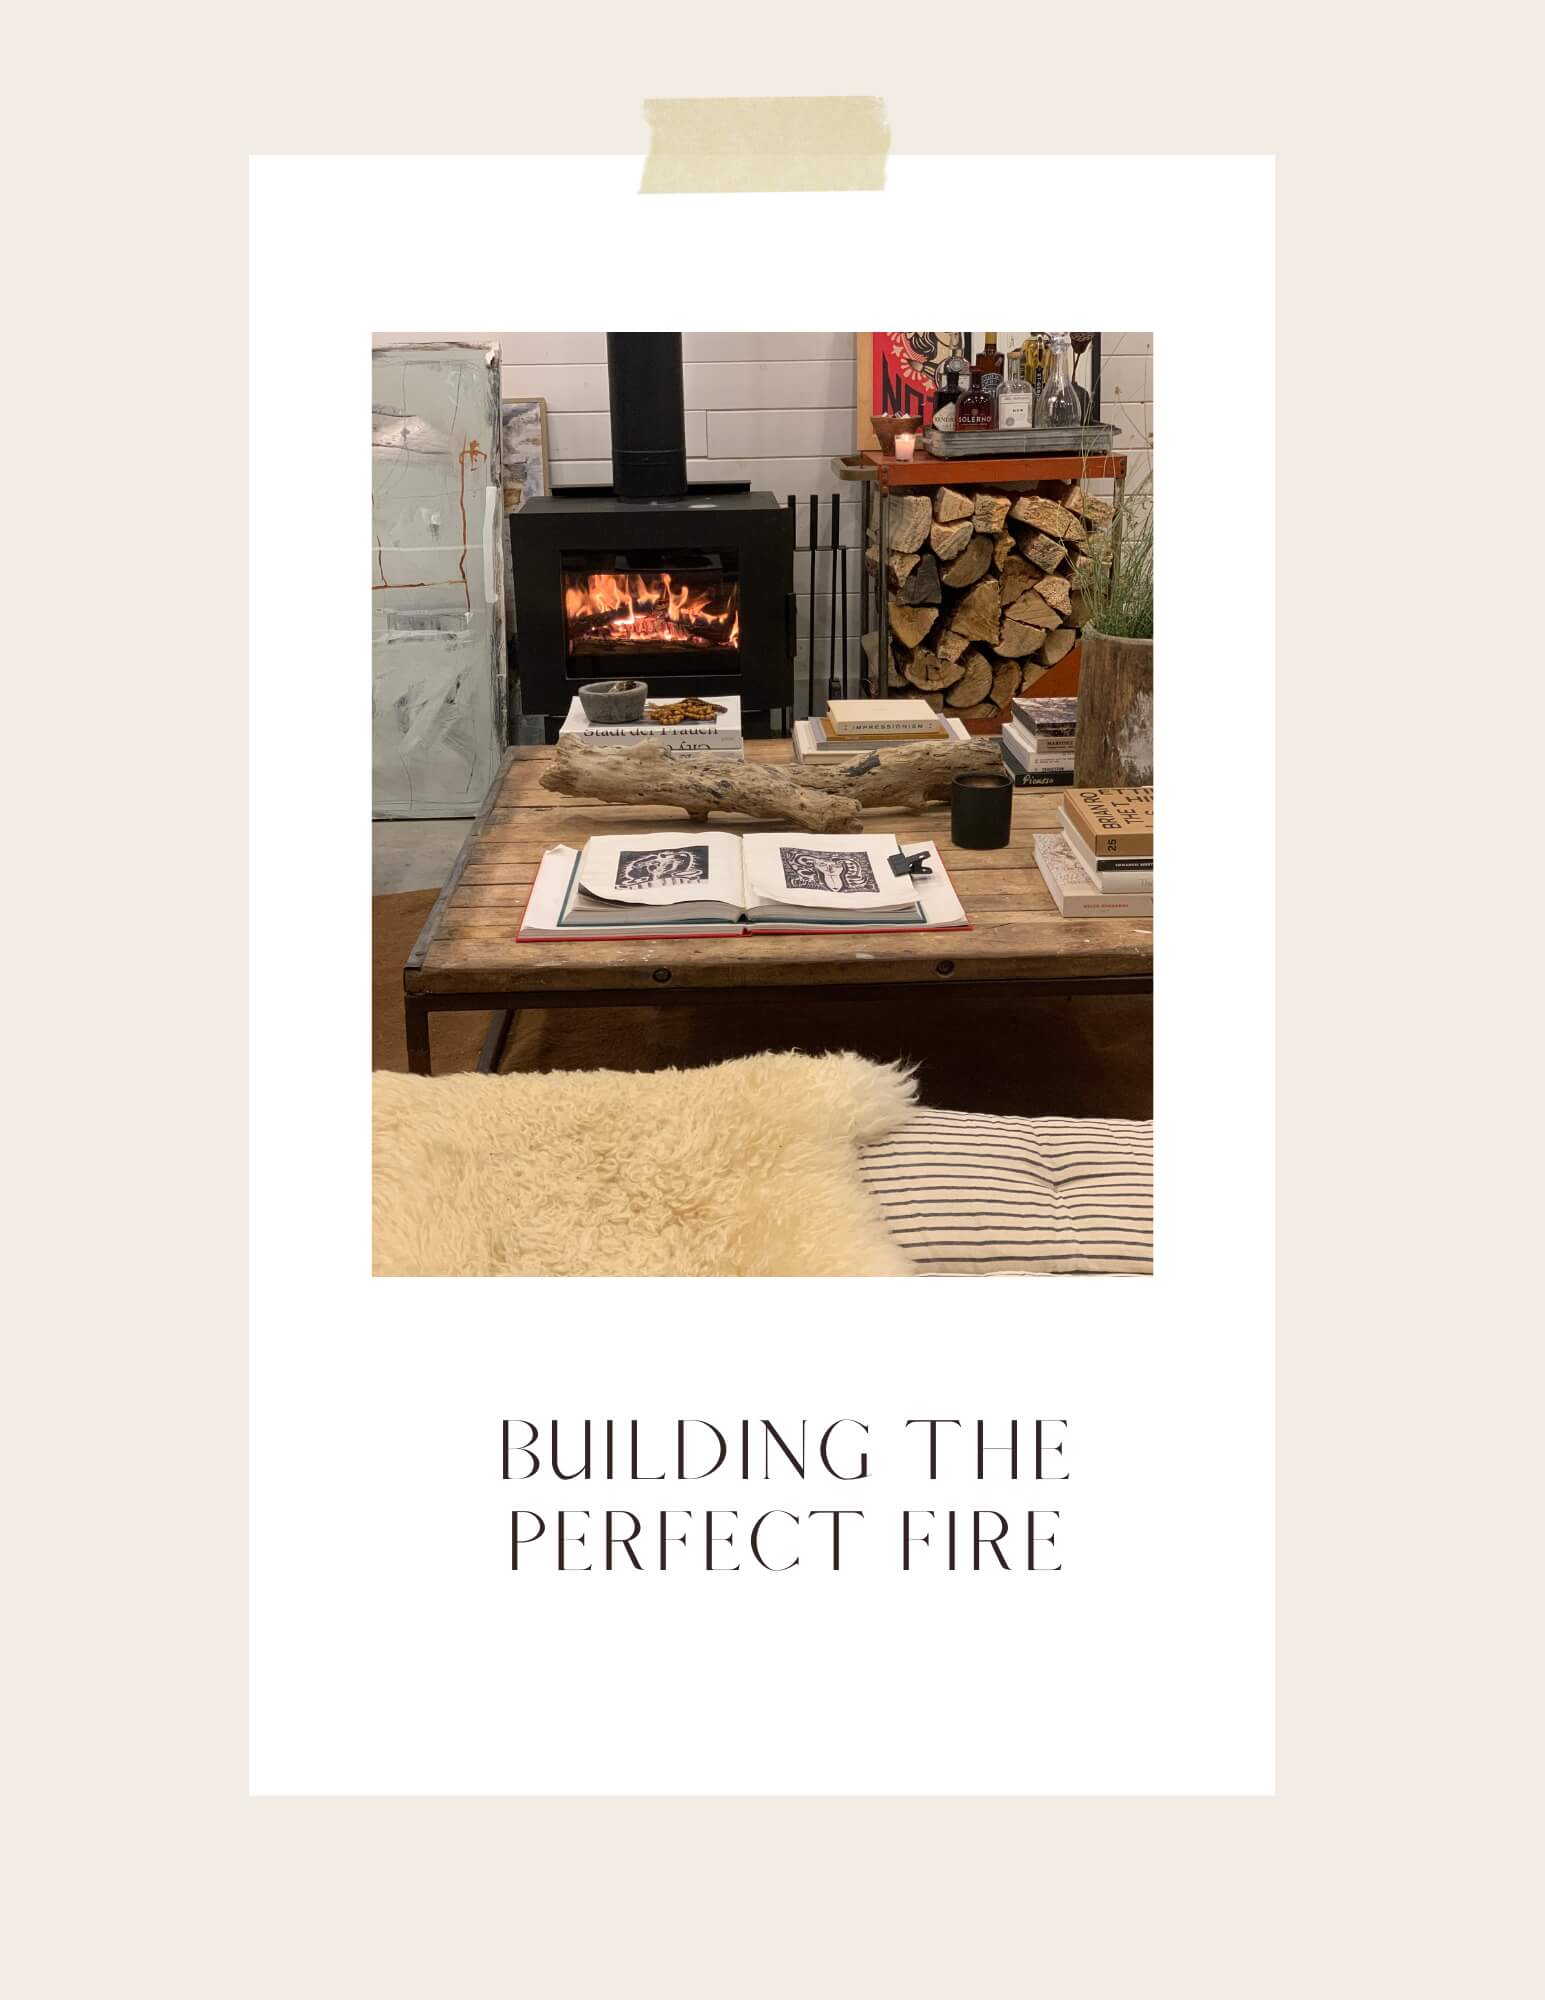 How to Build the Perfect Fire